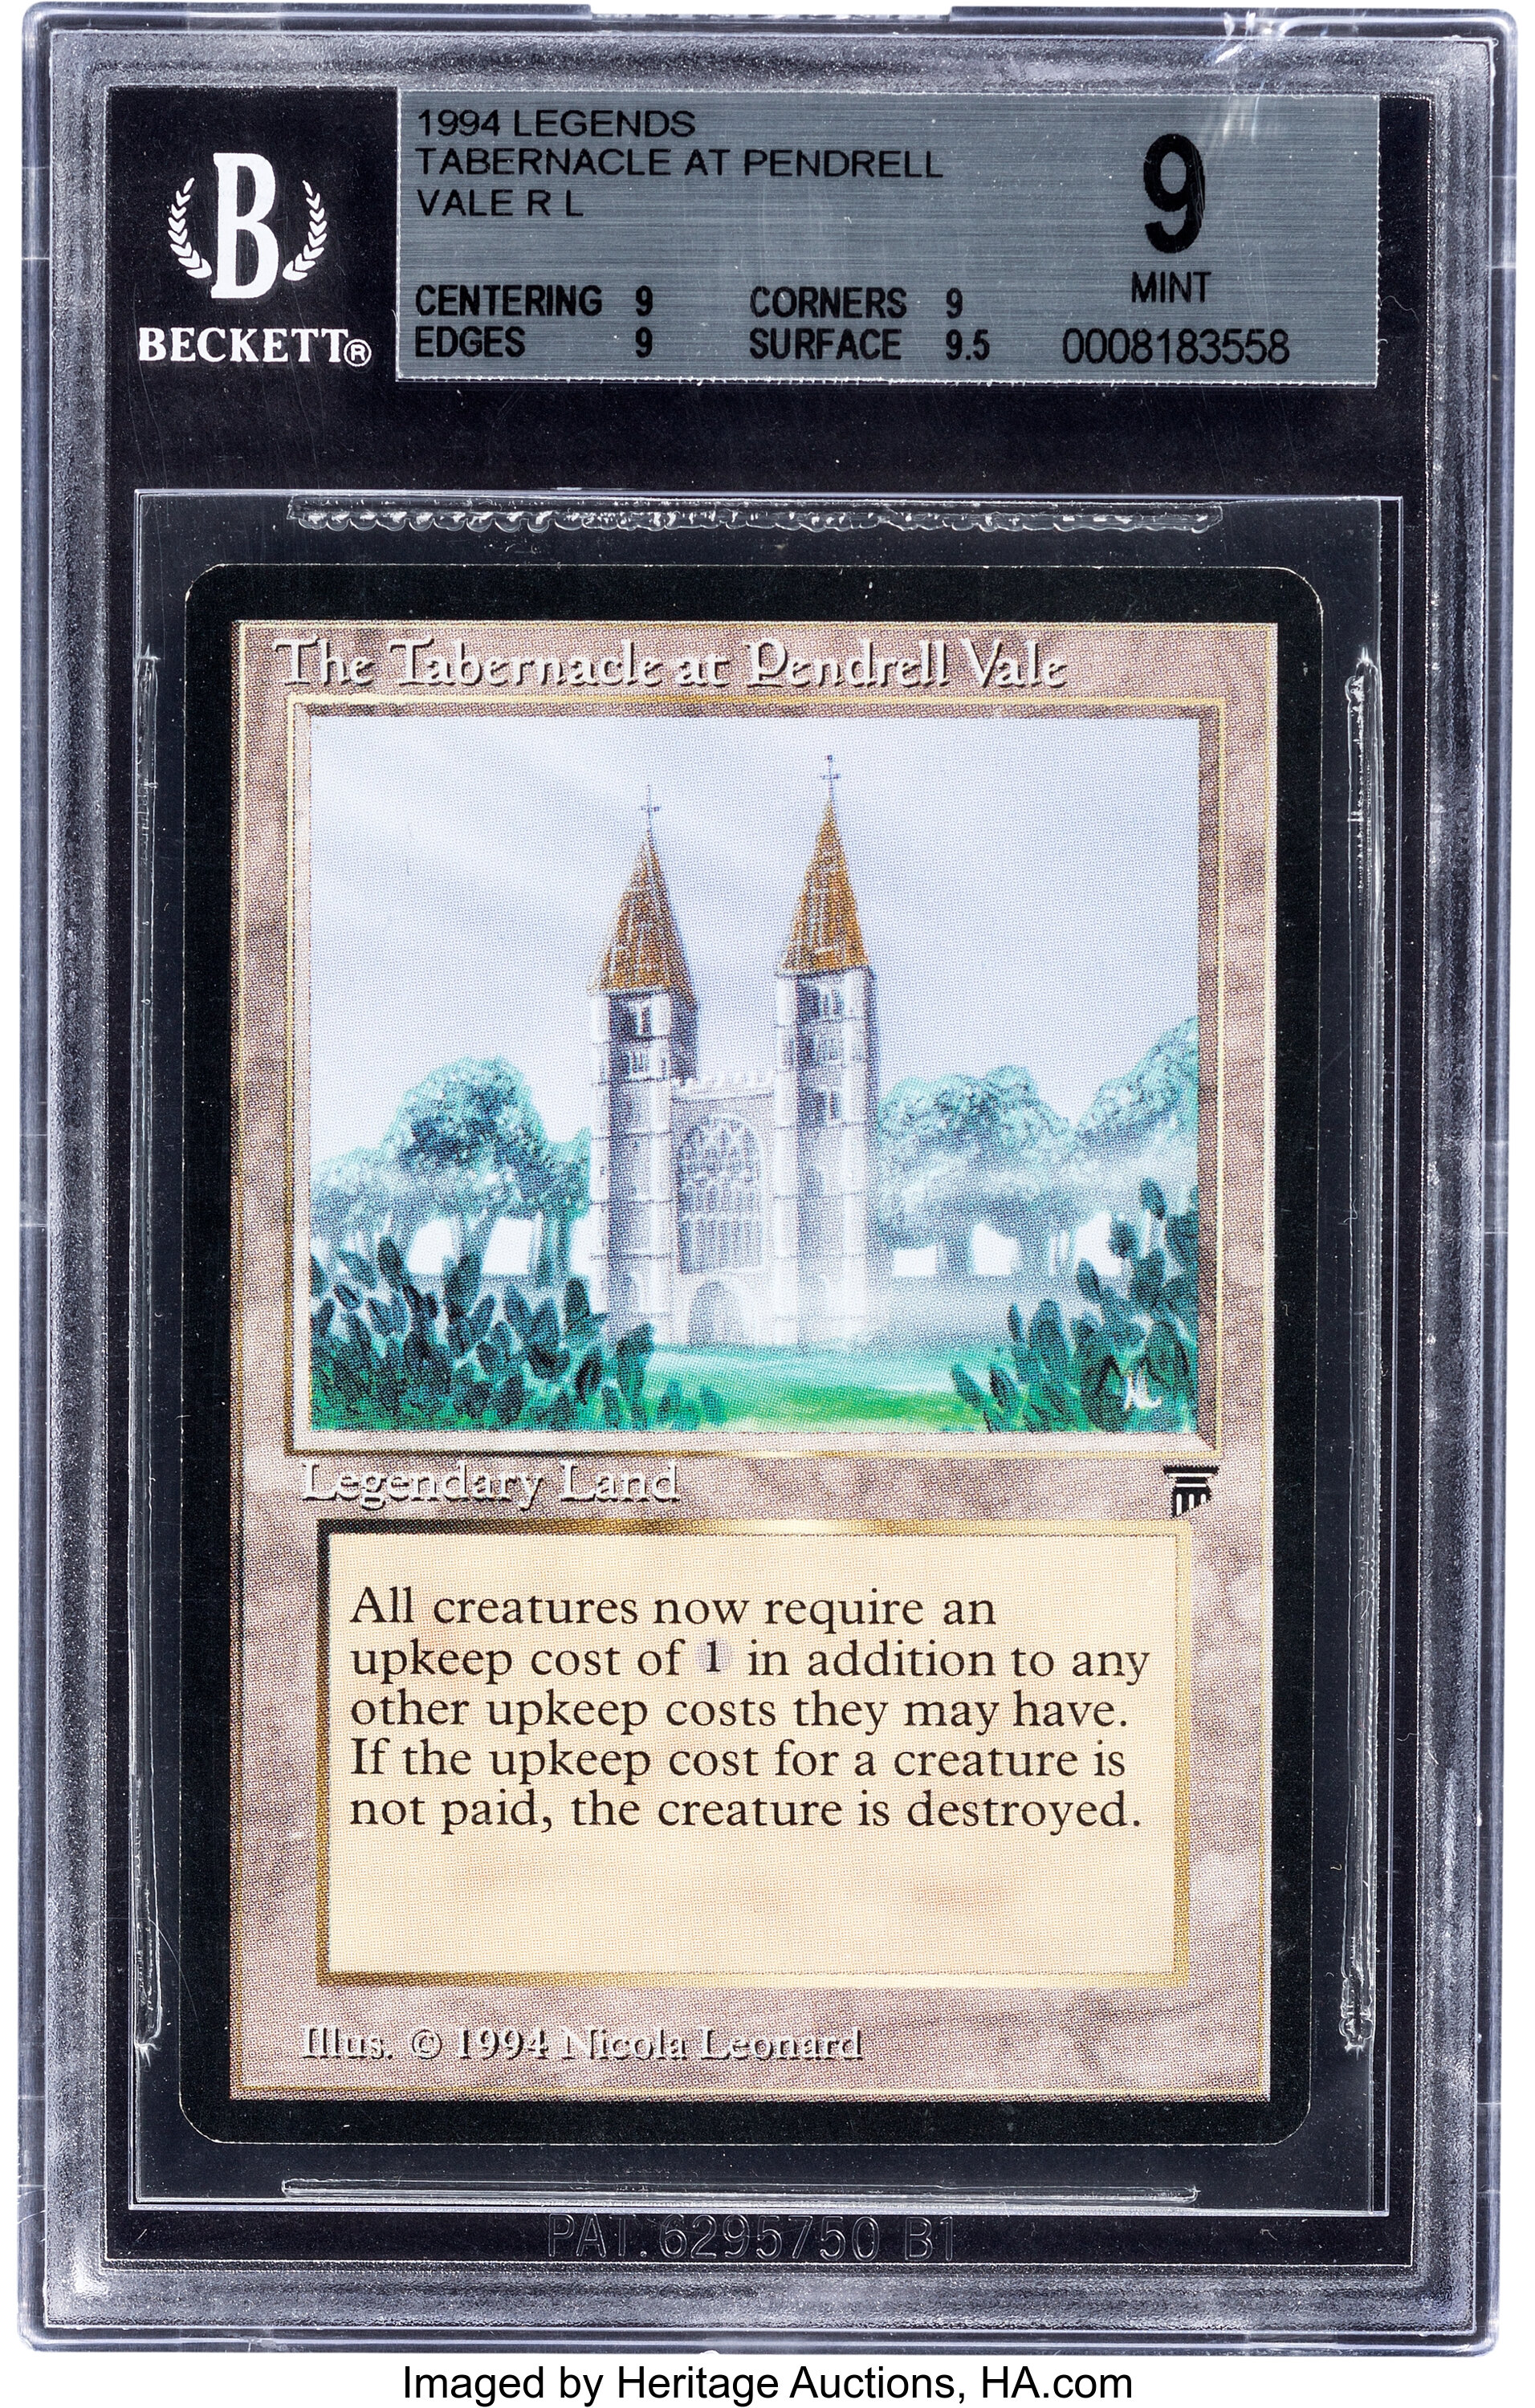 Magic: The Gathering Legends Tabernacle at Pendrell Vale BGS 9 